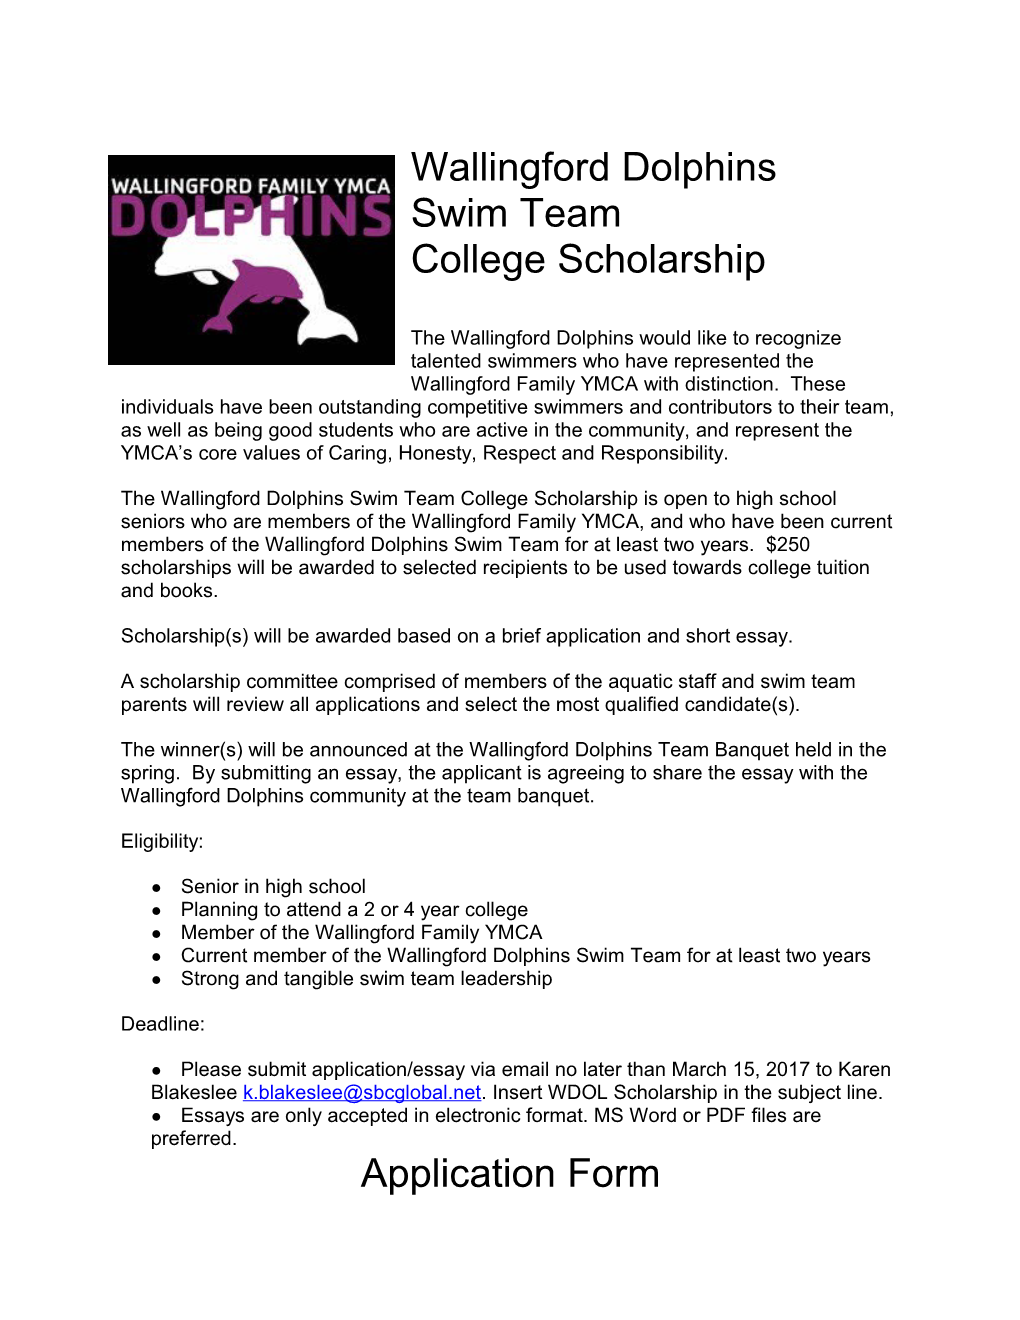 Wallingford Dolphins